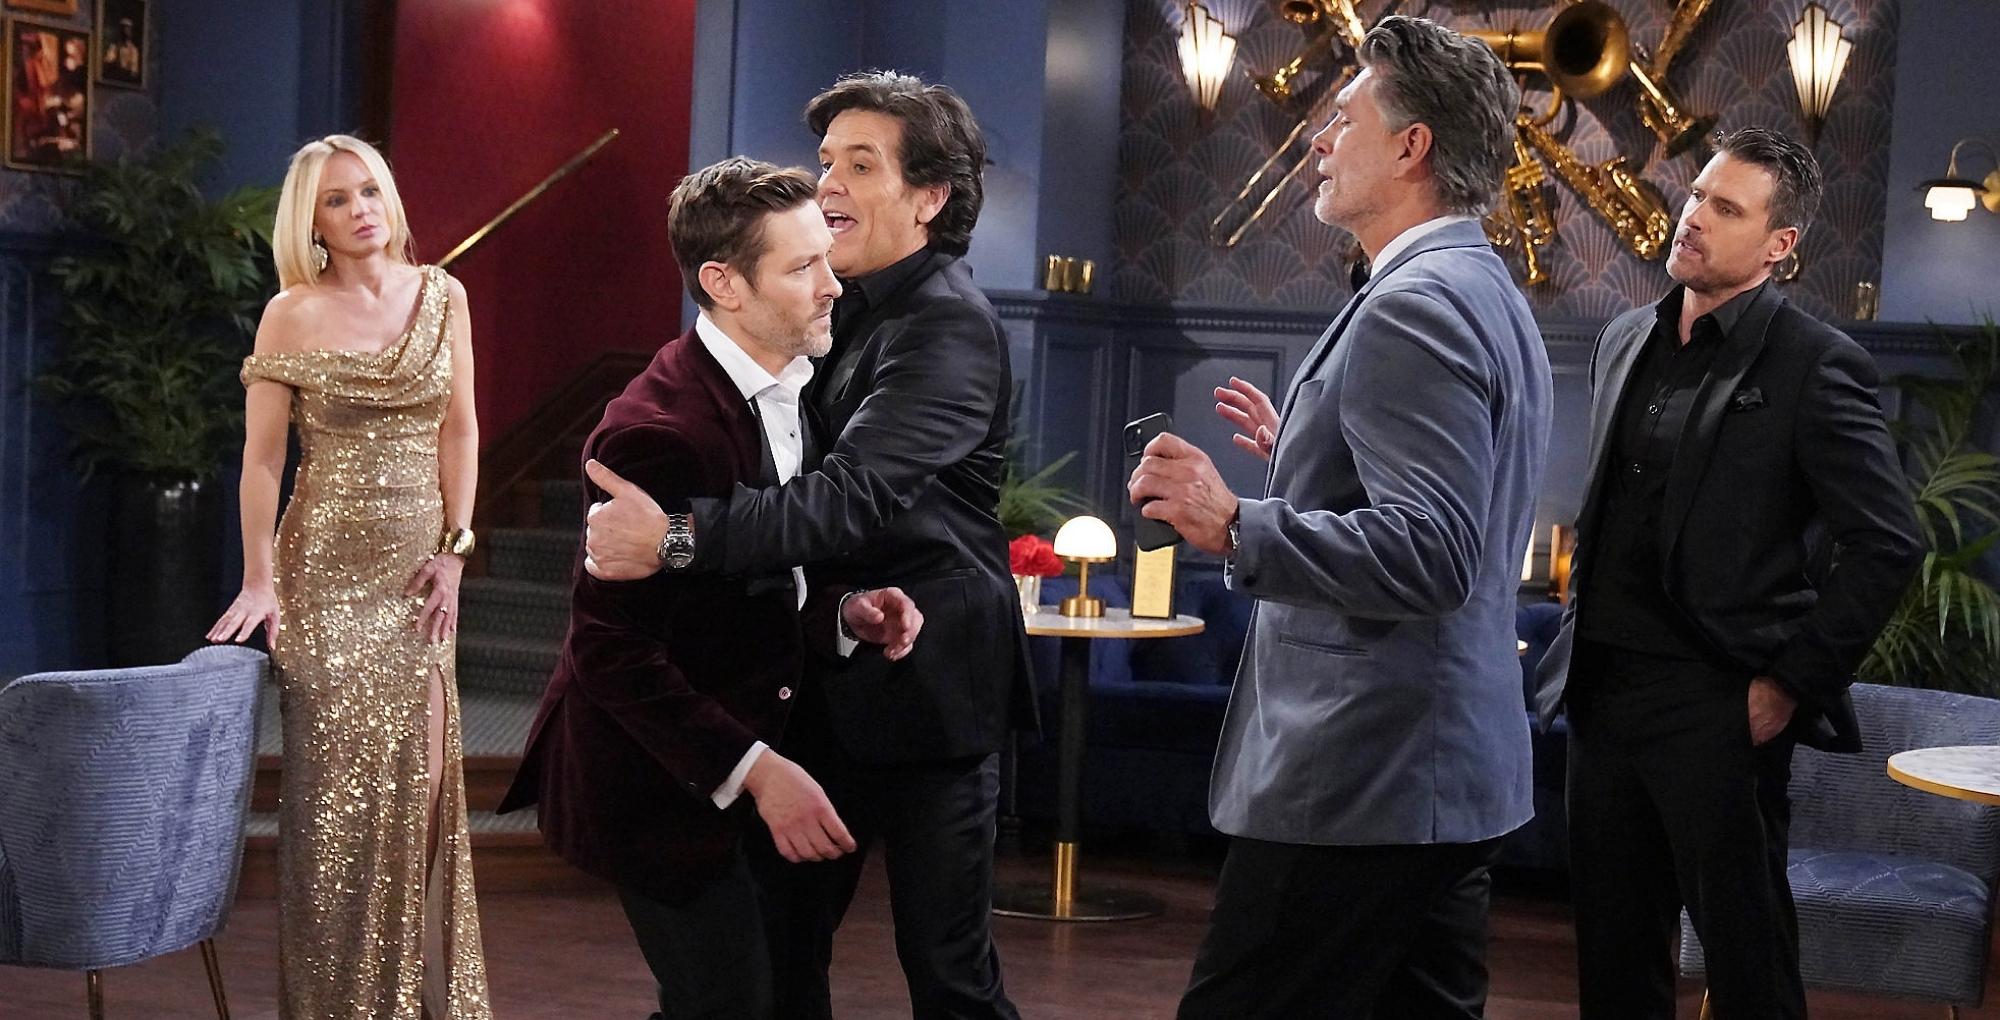 daniel romalotti attacks jeremy in the young and the restless recap for april 4, as danny holds him back and sharon watches